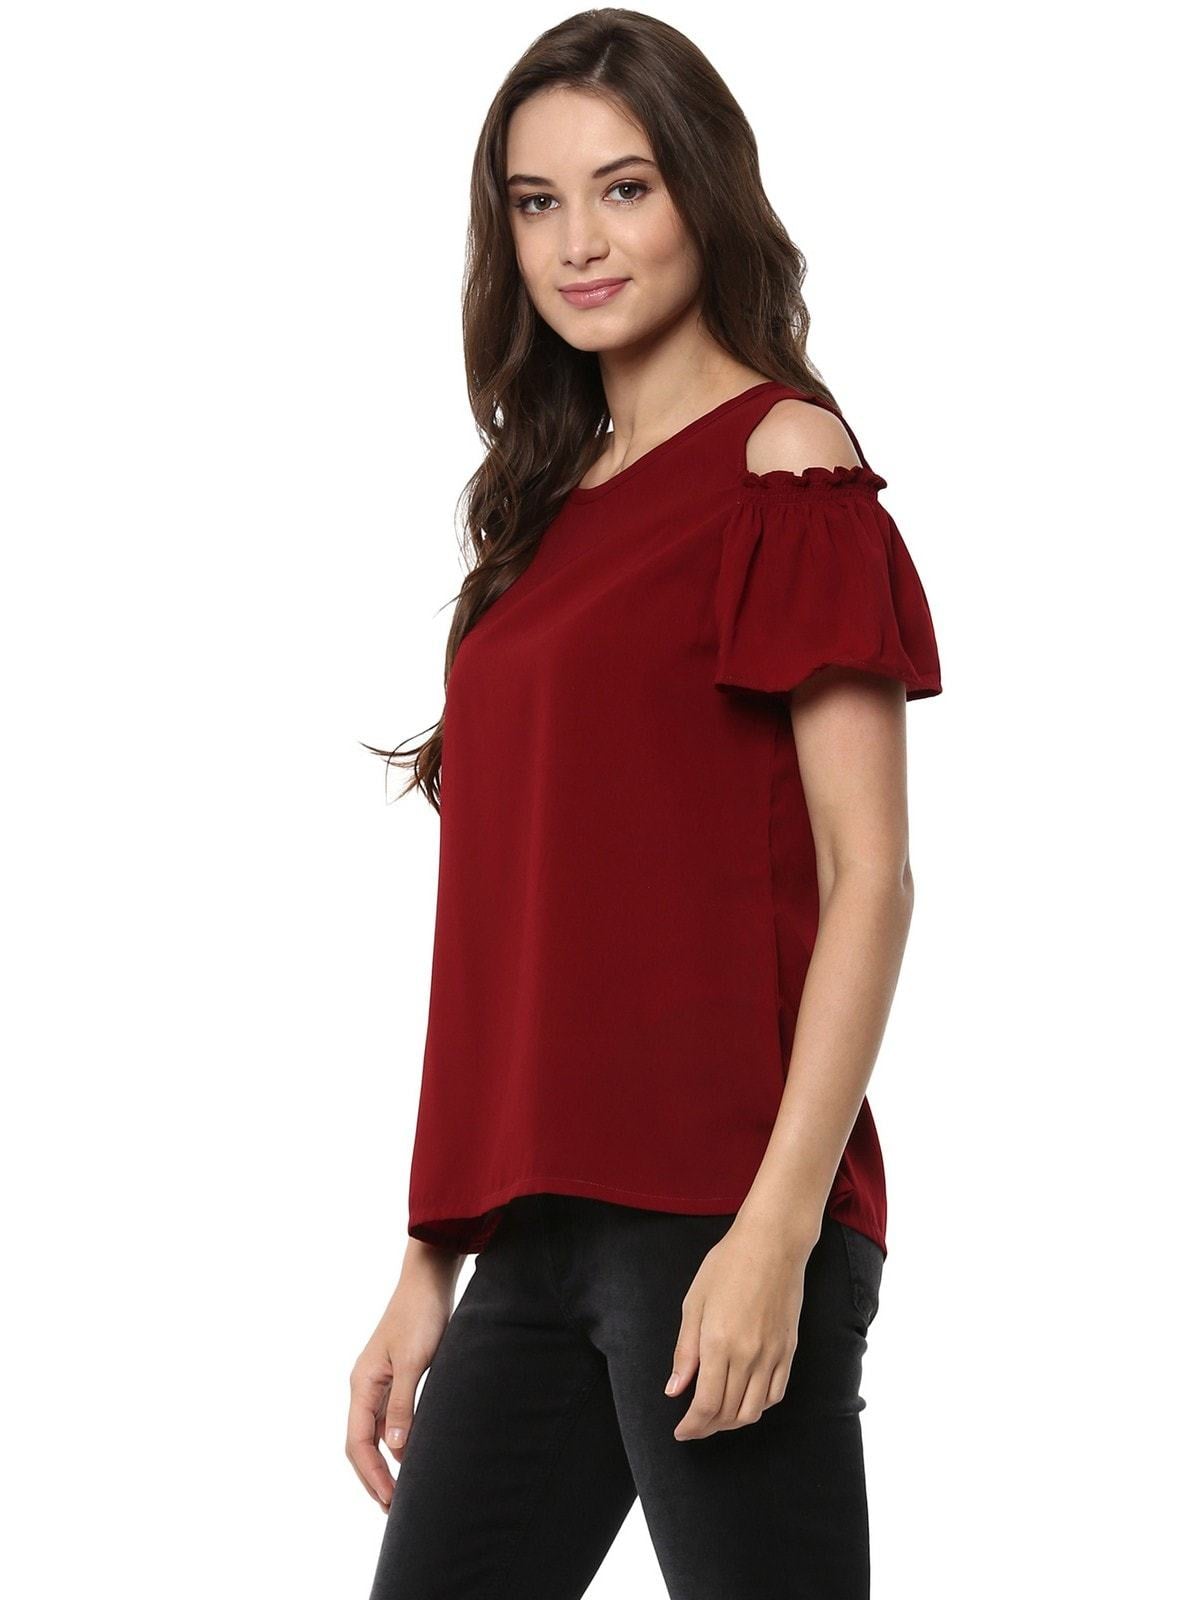 Women's Solid Top With Smoking Cold-Shoulder - Pannkh